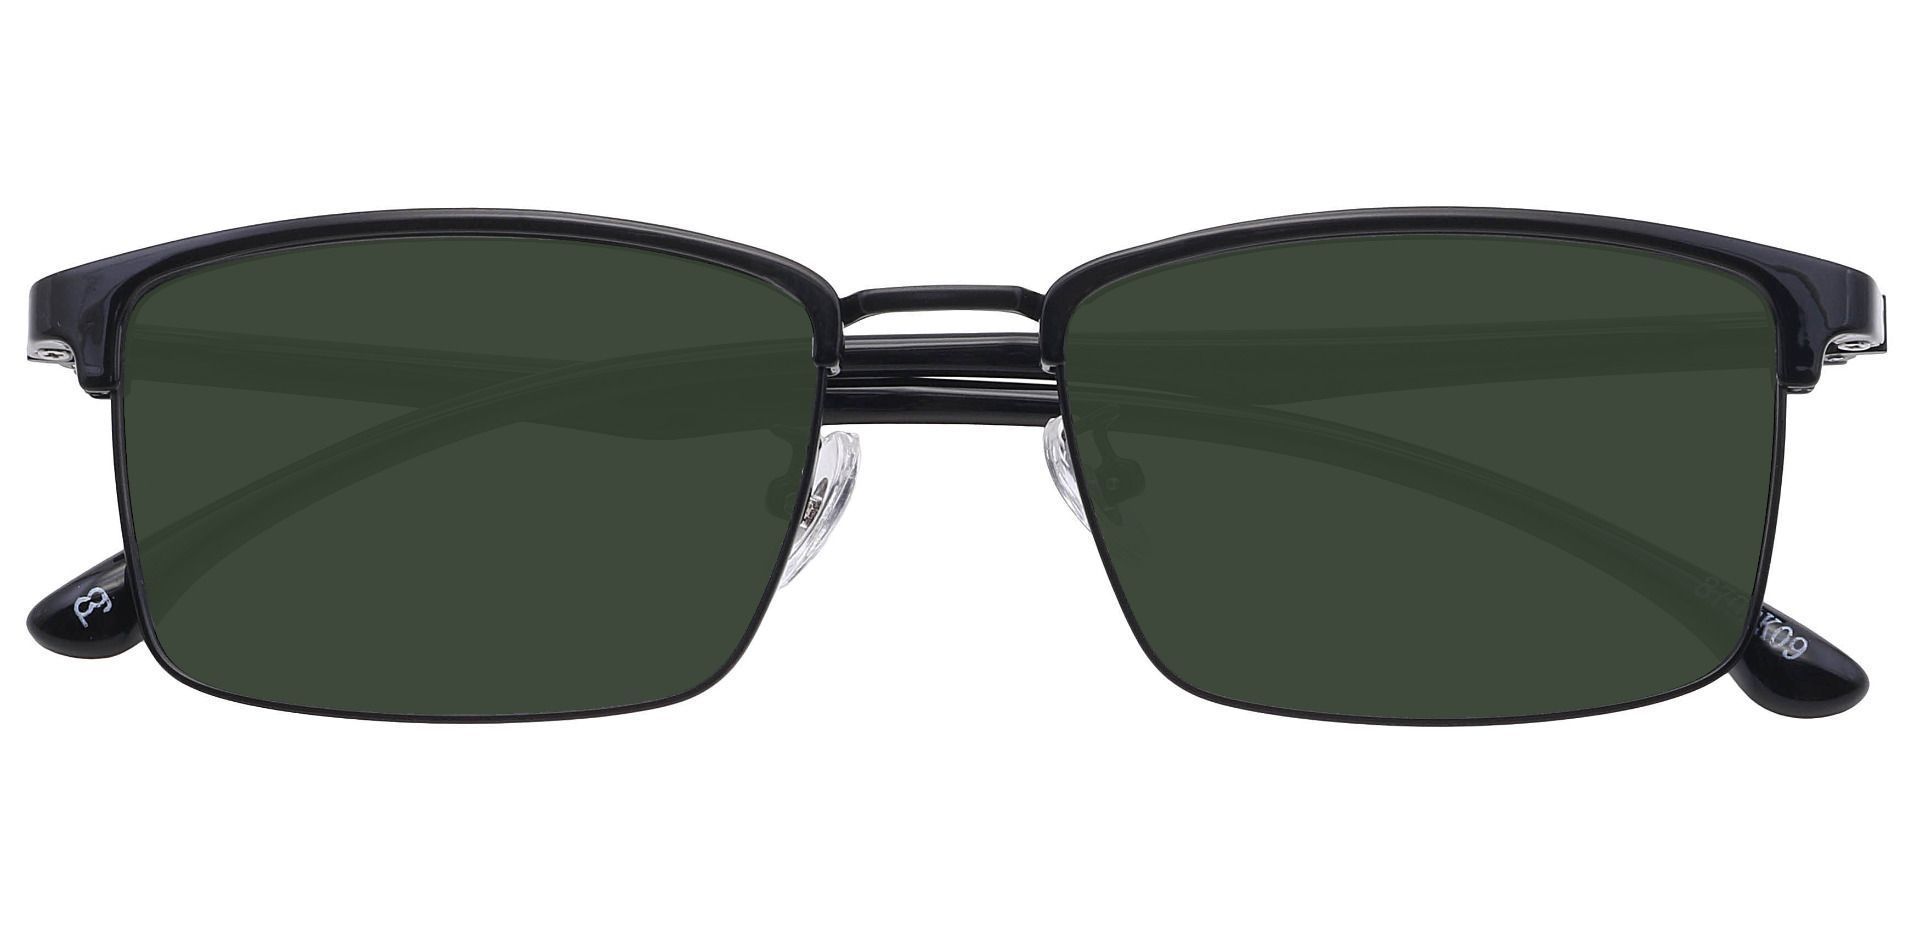 Young Browline Non-Rx Sunglasses - Black Frame With Green Lenses